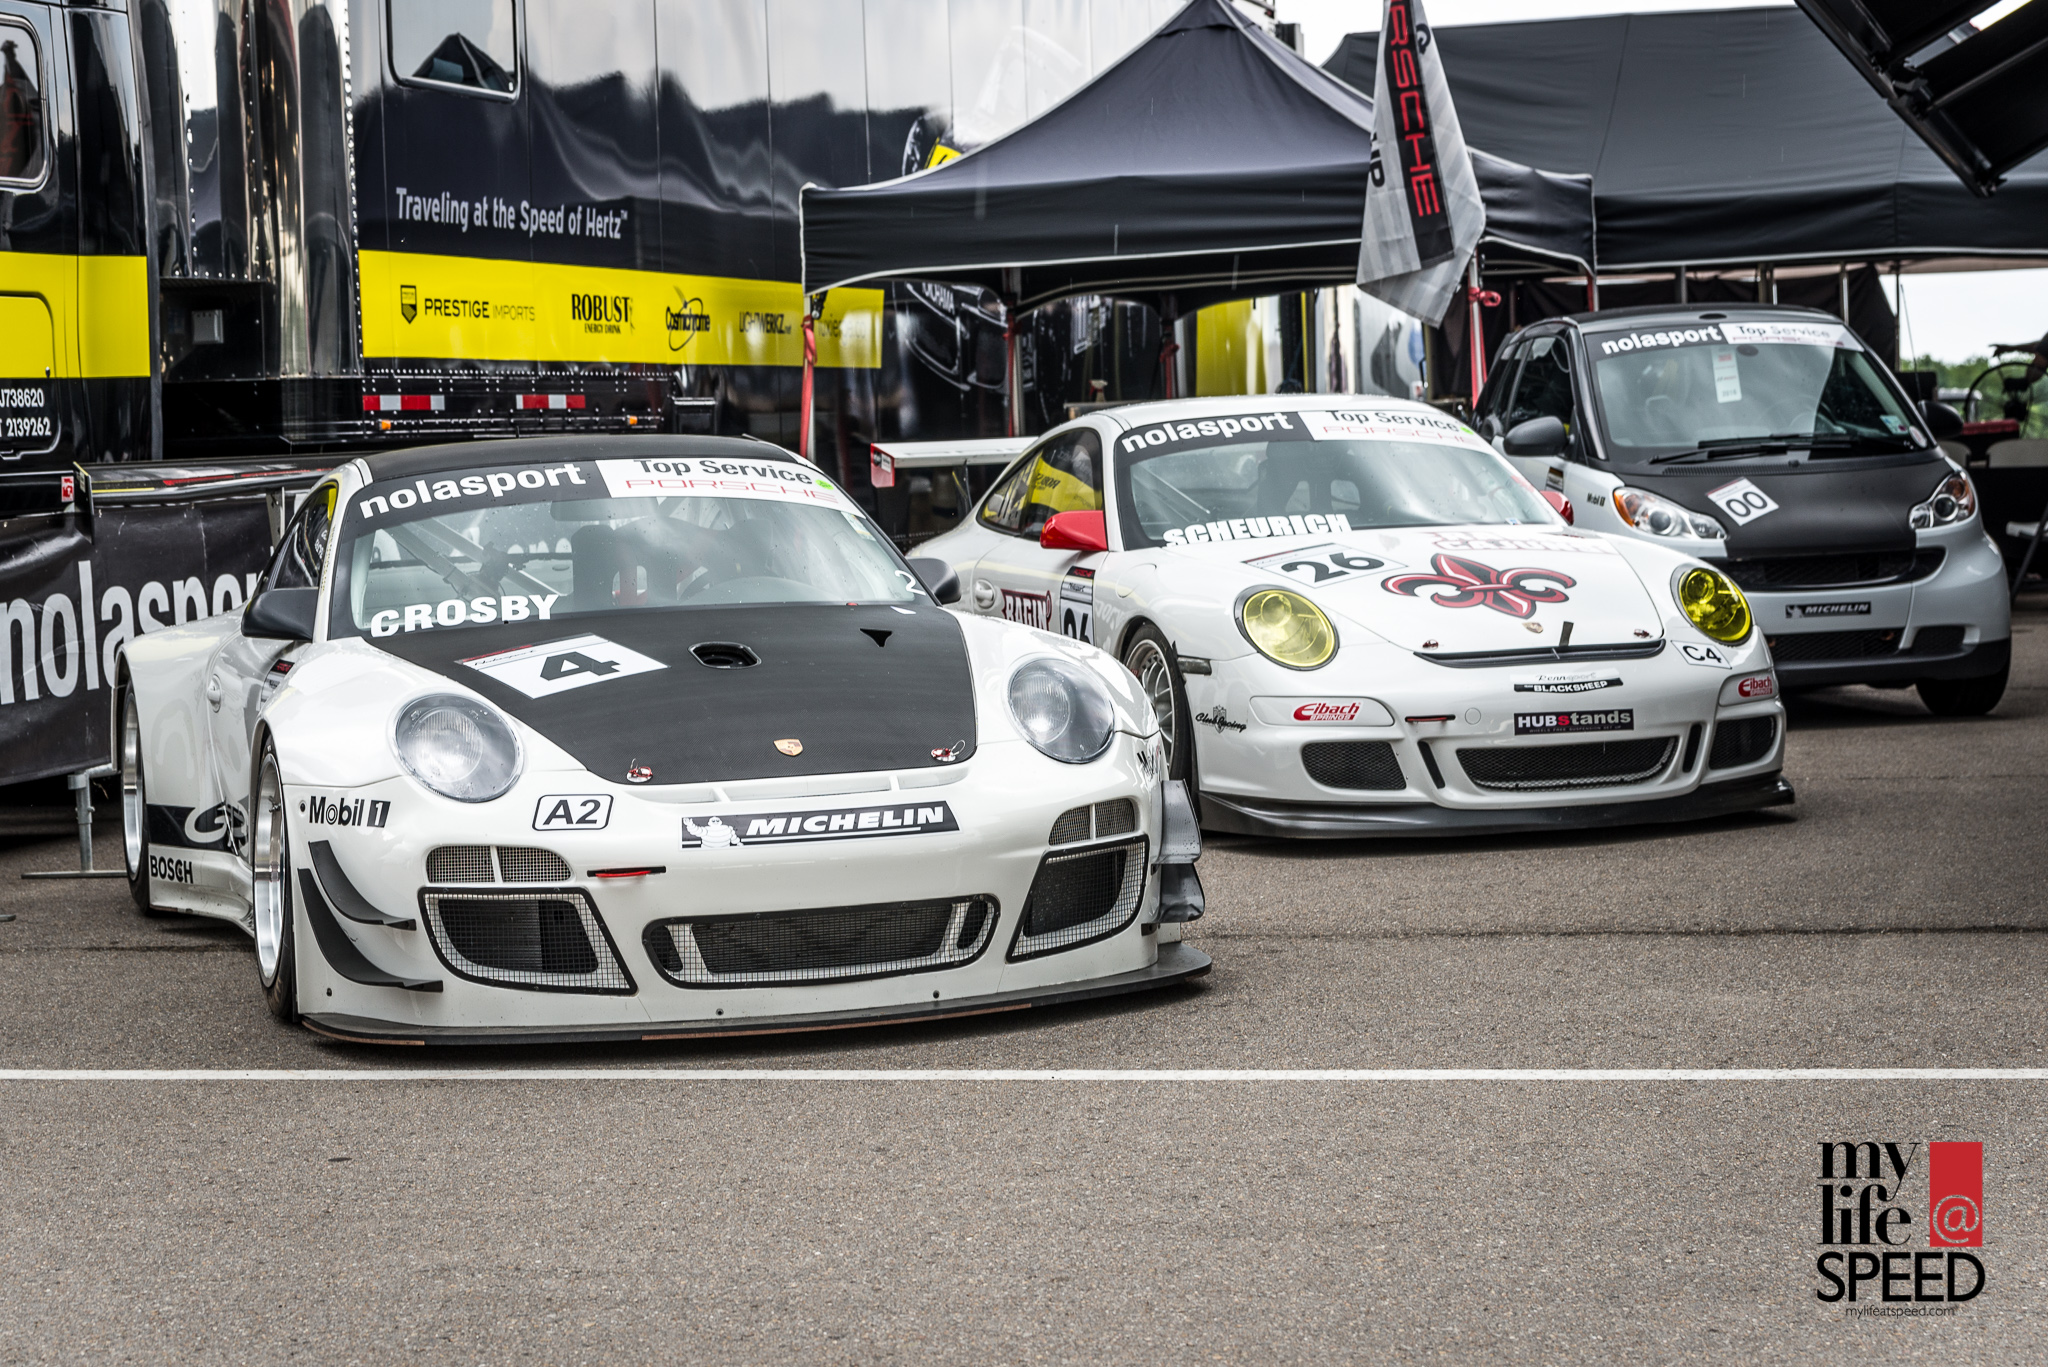 Impressive wide body RSR next to a GT3 Cup car